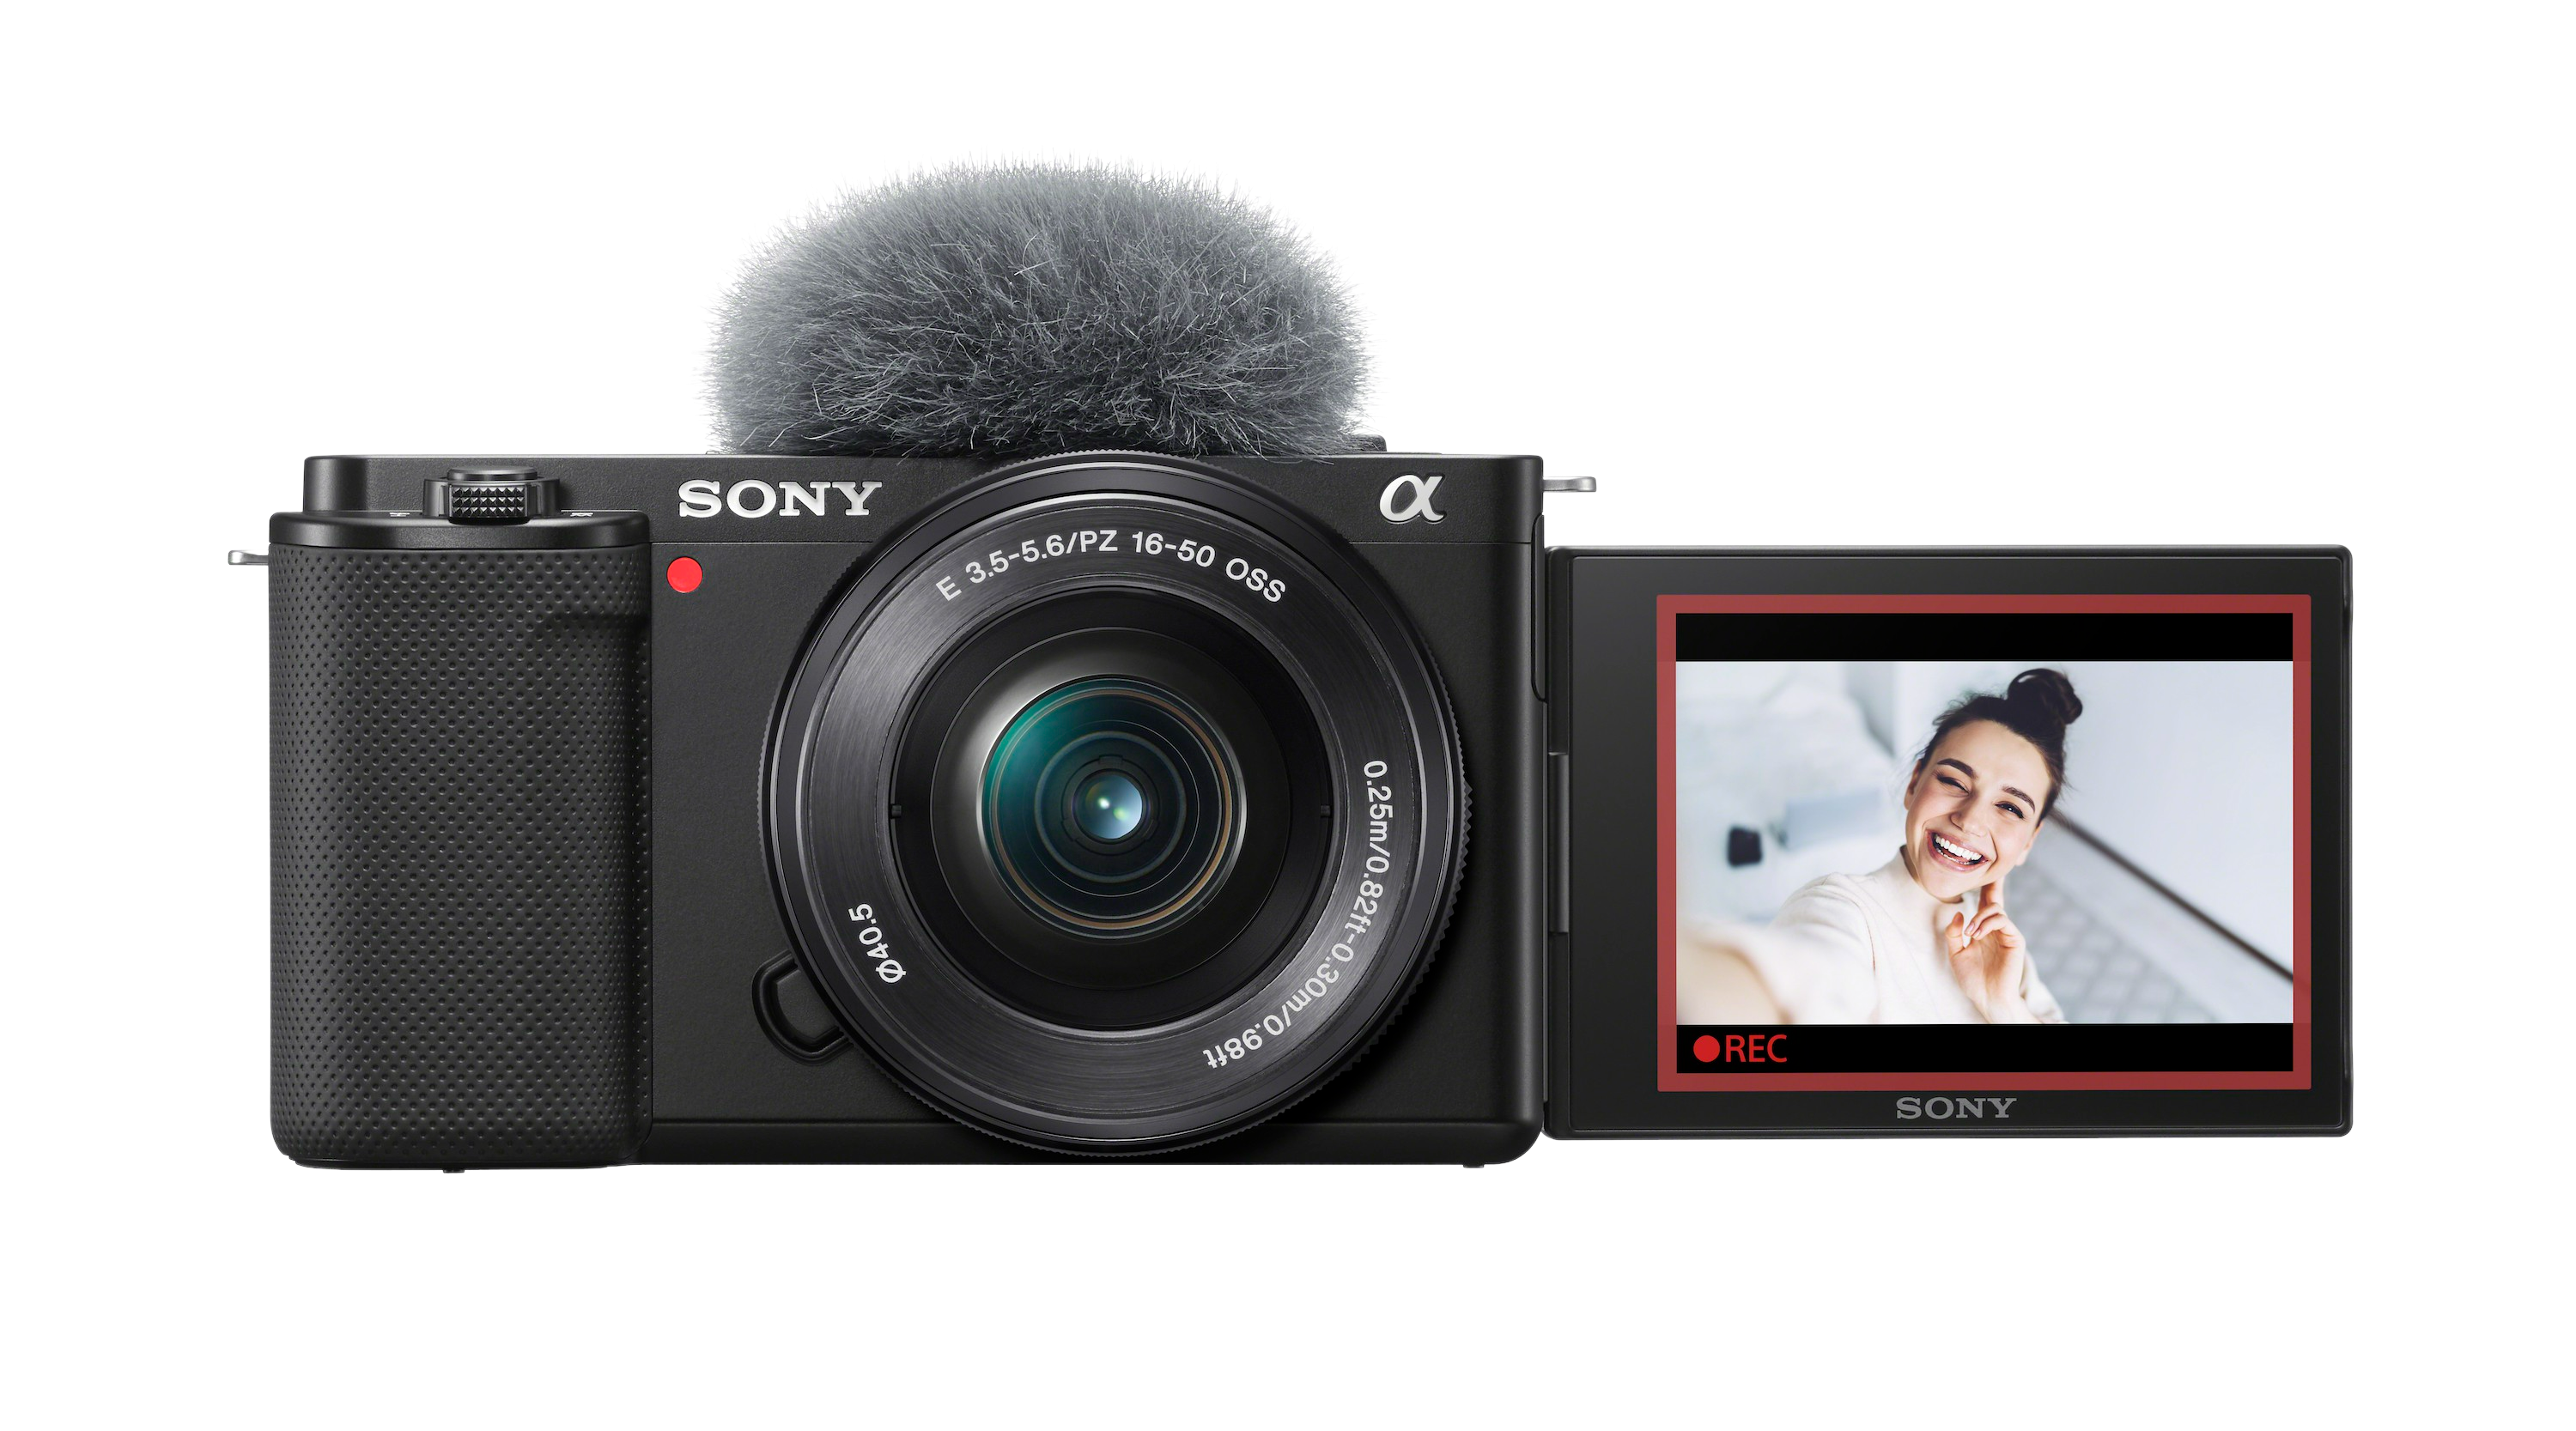 Rent Sony A6000 + 16-50mm f/3.5-5.6 OSS PZ, Camera kit from €34.90 per month